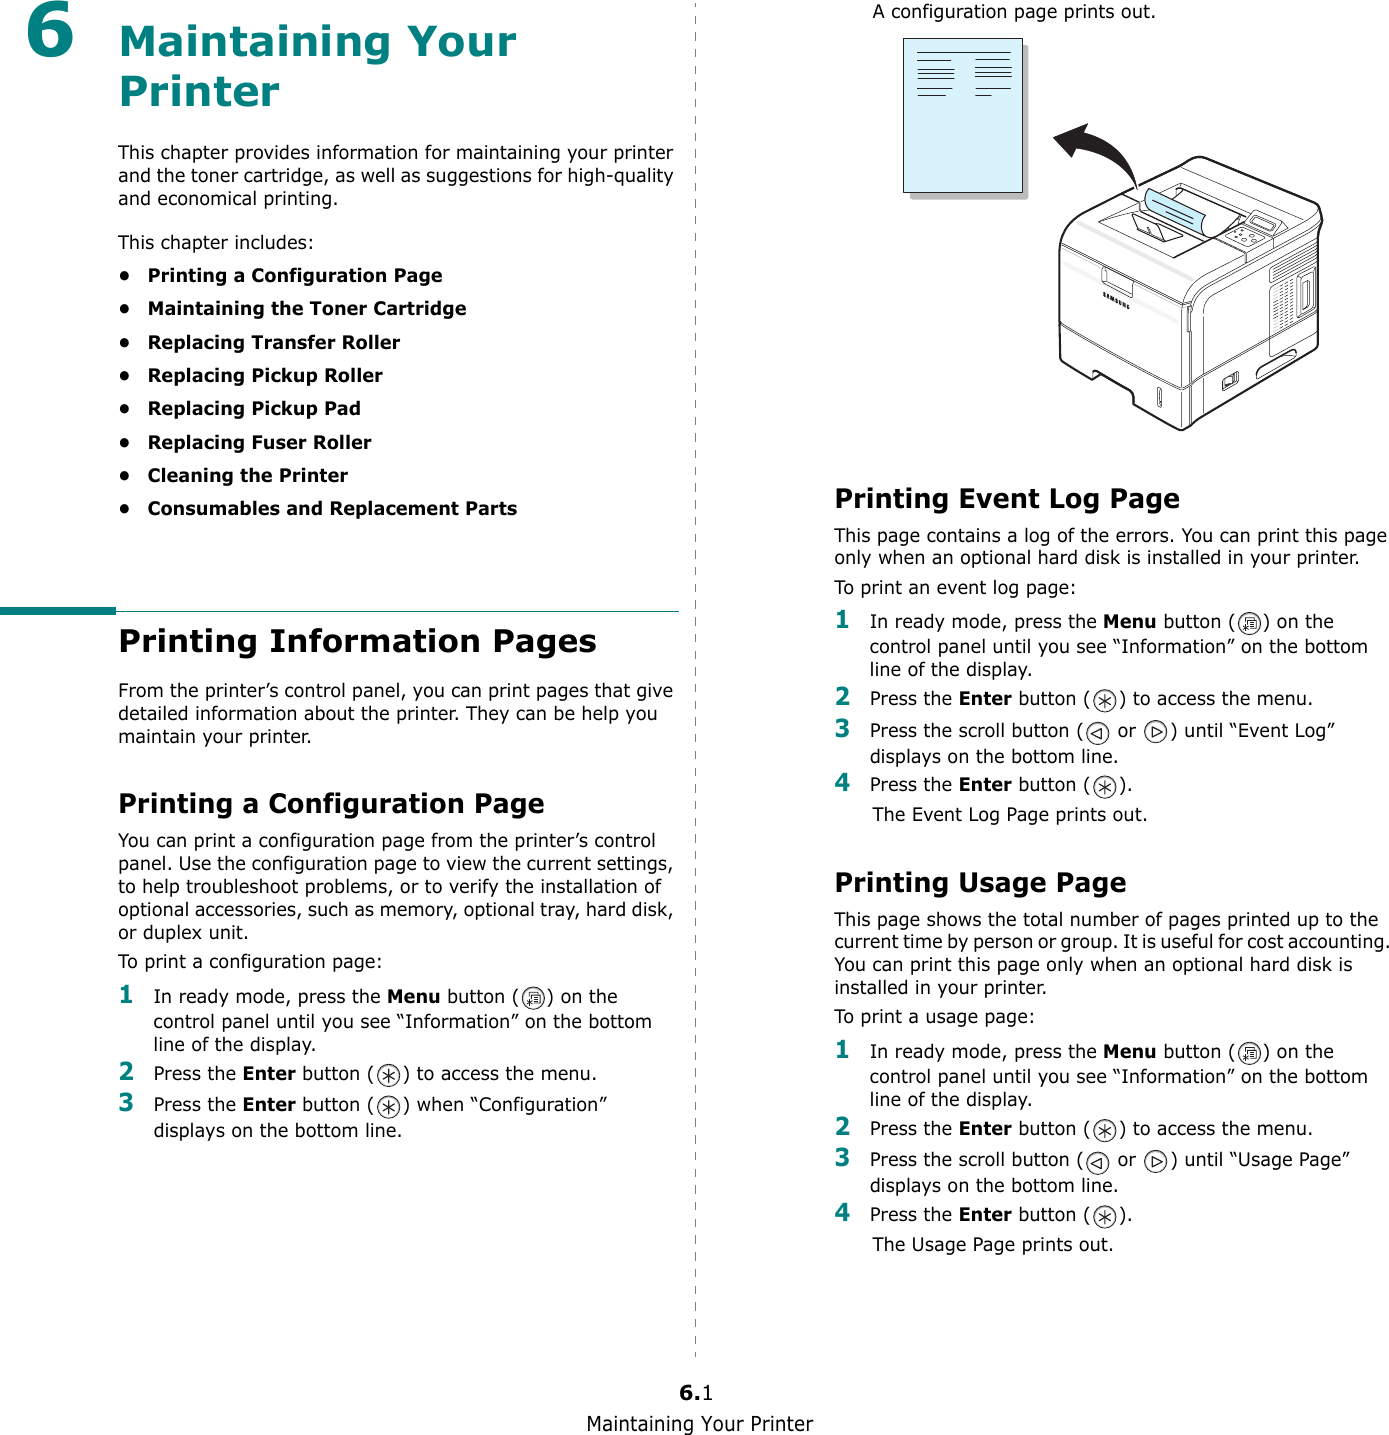 Maintaining Your Printer6.16Maintaining Your PrinterThis chapter provides information for maintaining your printer and the toner cartridge, as well as suggestions for high-quality and economical printing.This chapter includes:• Printing a Configuration Page• Maintaining the Toner Cartridge• Replacing Transfer Roller• Replacing Pickup Roller• Replacing Pickup Pad• Replacing Fuser Roller• Cleaning the Printer• Consumables and Replacement PartsPrinting Information PagesFrom the printer’s control panel, you can print pages that give detailed information about the printer. They can be help you maintain your printer.Printing a Configuration PageYou can print a configuration page from the printer’s control panel. Use the configuration page to view the current settings, to help troubleshoot problems, or to verify the installation of optional accessories, such as memory, optional tray, hard disk, or duplex unit. To print a configuration page:1In ready mode, press the Menu button ( ) on the control panel until you see “Information” on the bottom line of the display.2Press the Enter button ( ) to access the menu.3Press the Enter button ( ) when “Configuration” displays on the bottom line.A configuration page prints out. Printing Event Log PageThis page contains a log of the errors. You can print this page only when an optional hard disk is installed in your printer. To print an event log page:1In ready mode, press the Menu button ( ) on the control panel until you see “Information” on the bottom line of the display.2Press the Enter button ( ) to access the menu.3Press the scroll button (  or  ) until “Event Log” displays on the bottom line.4Press the Enter button ( ).The Event Log Page prints out.Printing Usage PageThis page shows the total number of pages printed up to the current time by person or group. It is useful for cost accounting. You can print this page only when an optional hard disk is installed in your printer.To print a usage page:1In ready mode, press the Menu button ( ) on the control panel until you see “Information” on the bottom line of the display.2Press the Enter button ( ) to access the menu.3Press the scroll button (  or  ) until “Usage Page” displays on the bottom line.4Press the Enter button ( ).The Usage Page prints out.